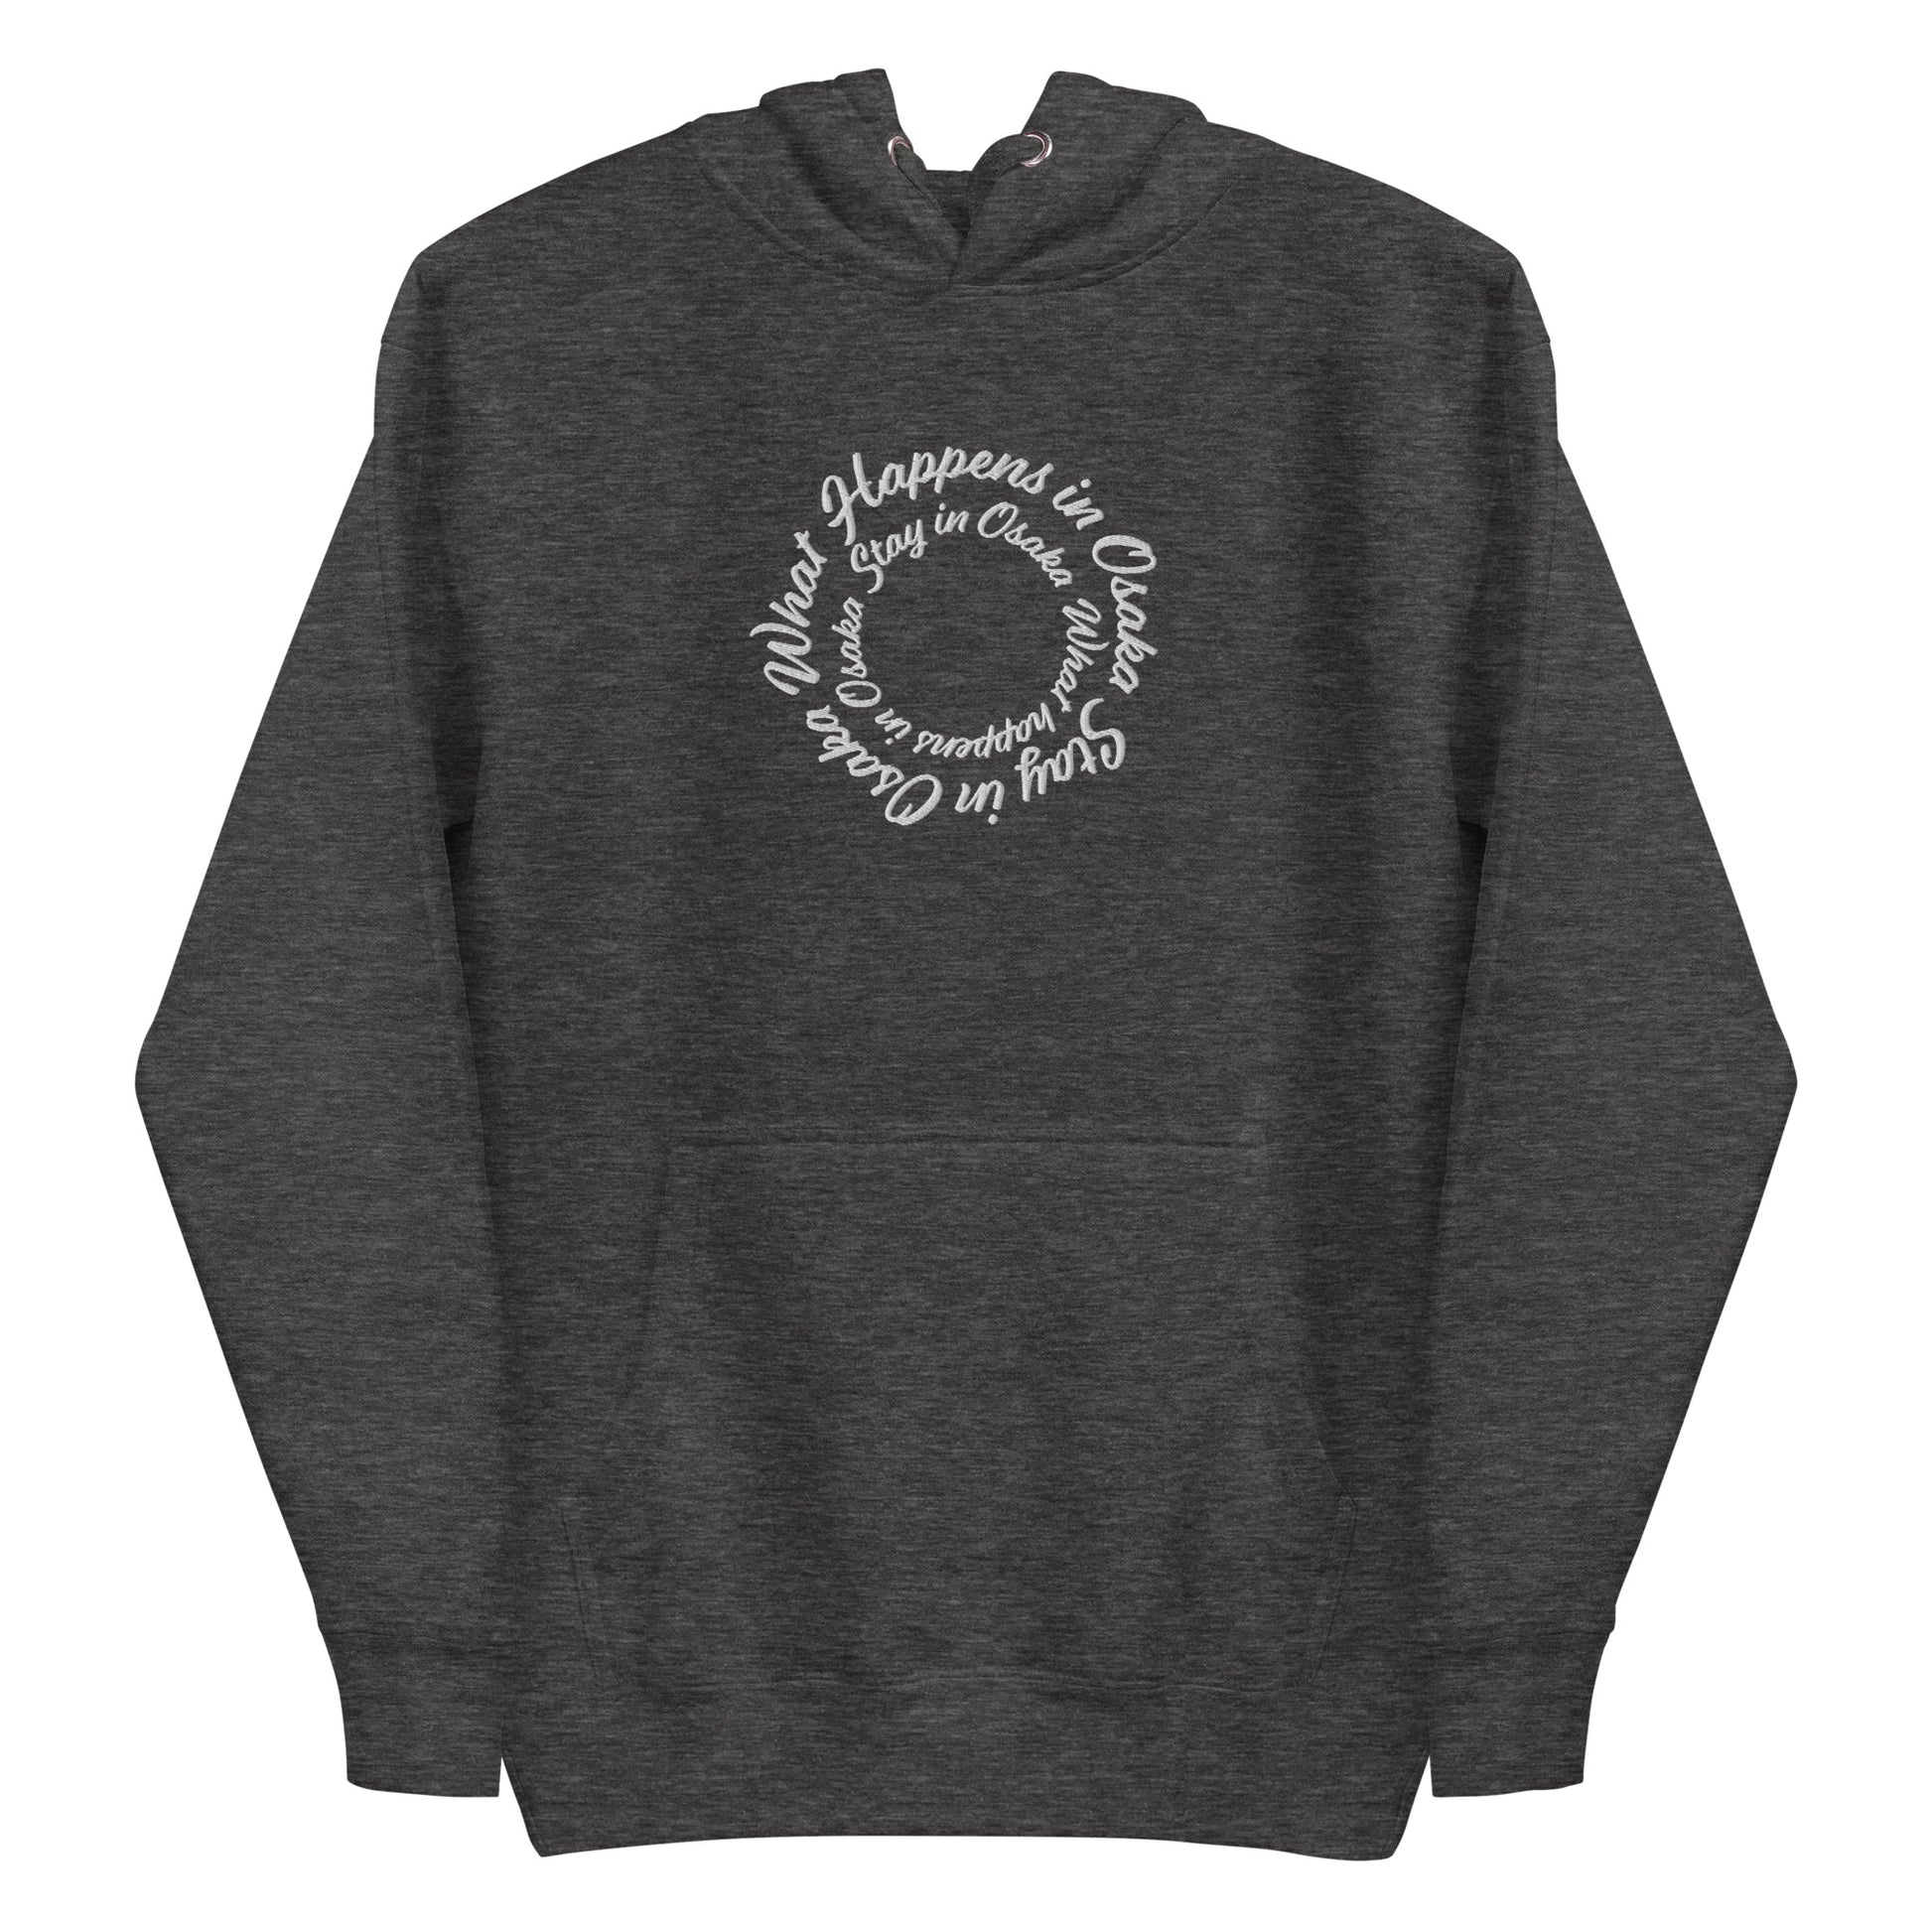 Dark Gray High Quality Hoodie - Front Design with White Embroidery of "What Happens in Osaka Stay in Osaka"